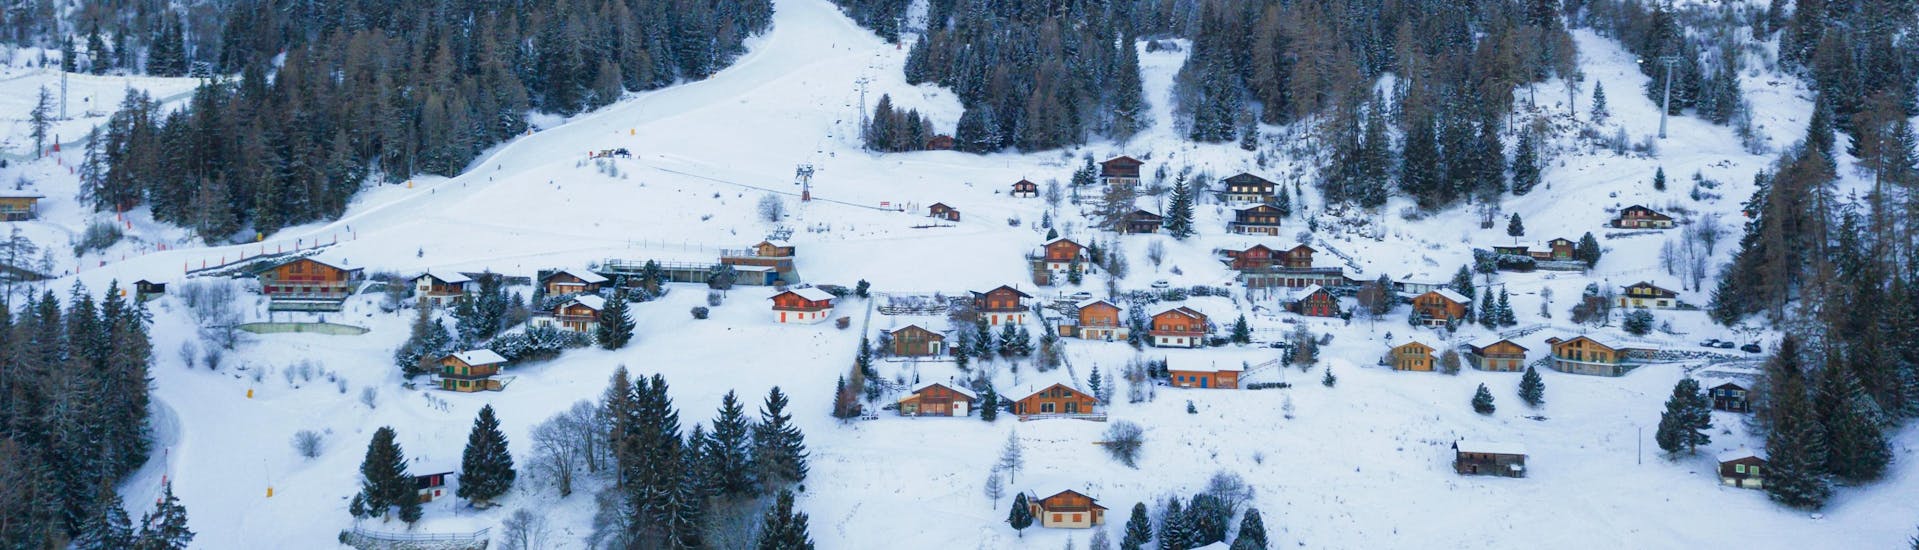 An aereal view of the small village of La Tzoumaz, a popular Swiss ski resort in which visitors can book ski lessons with the local ski schools.